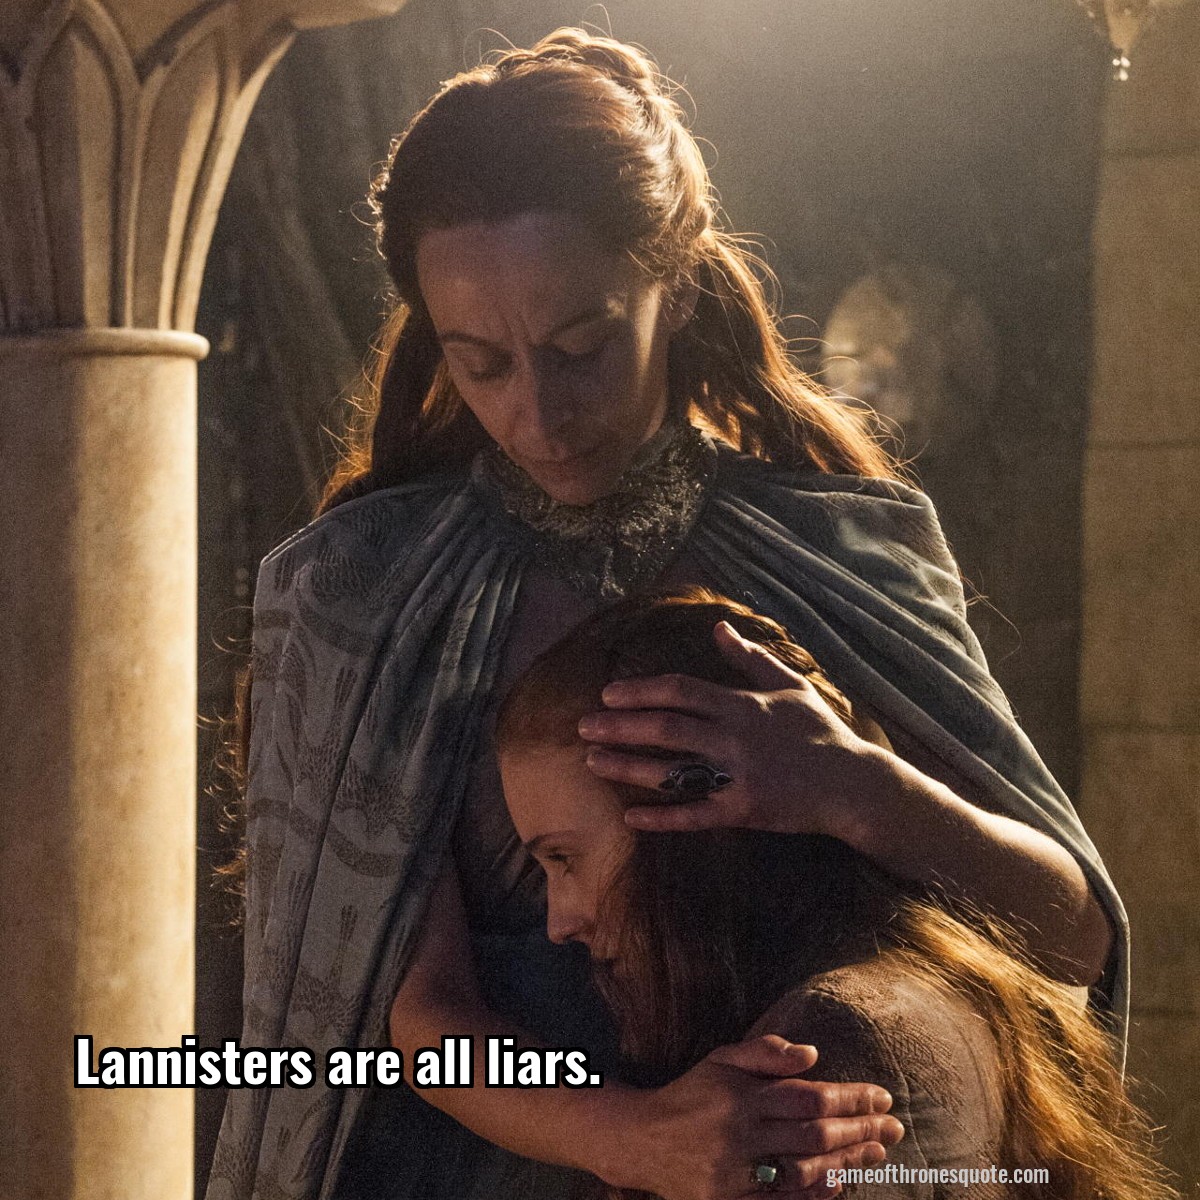 Lannisters are all liars.